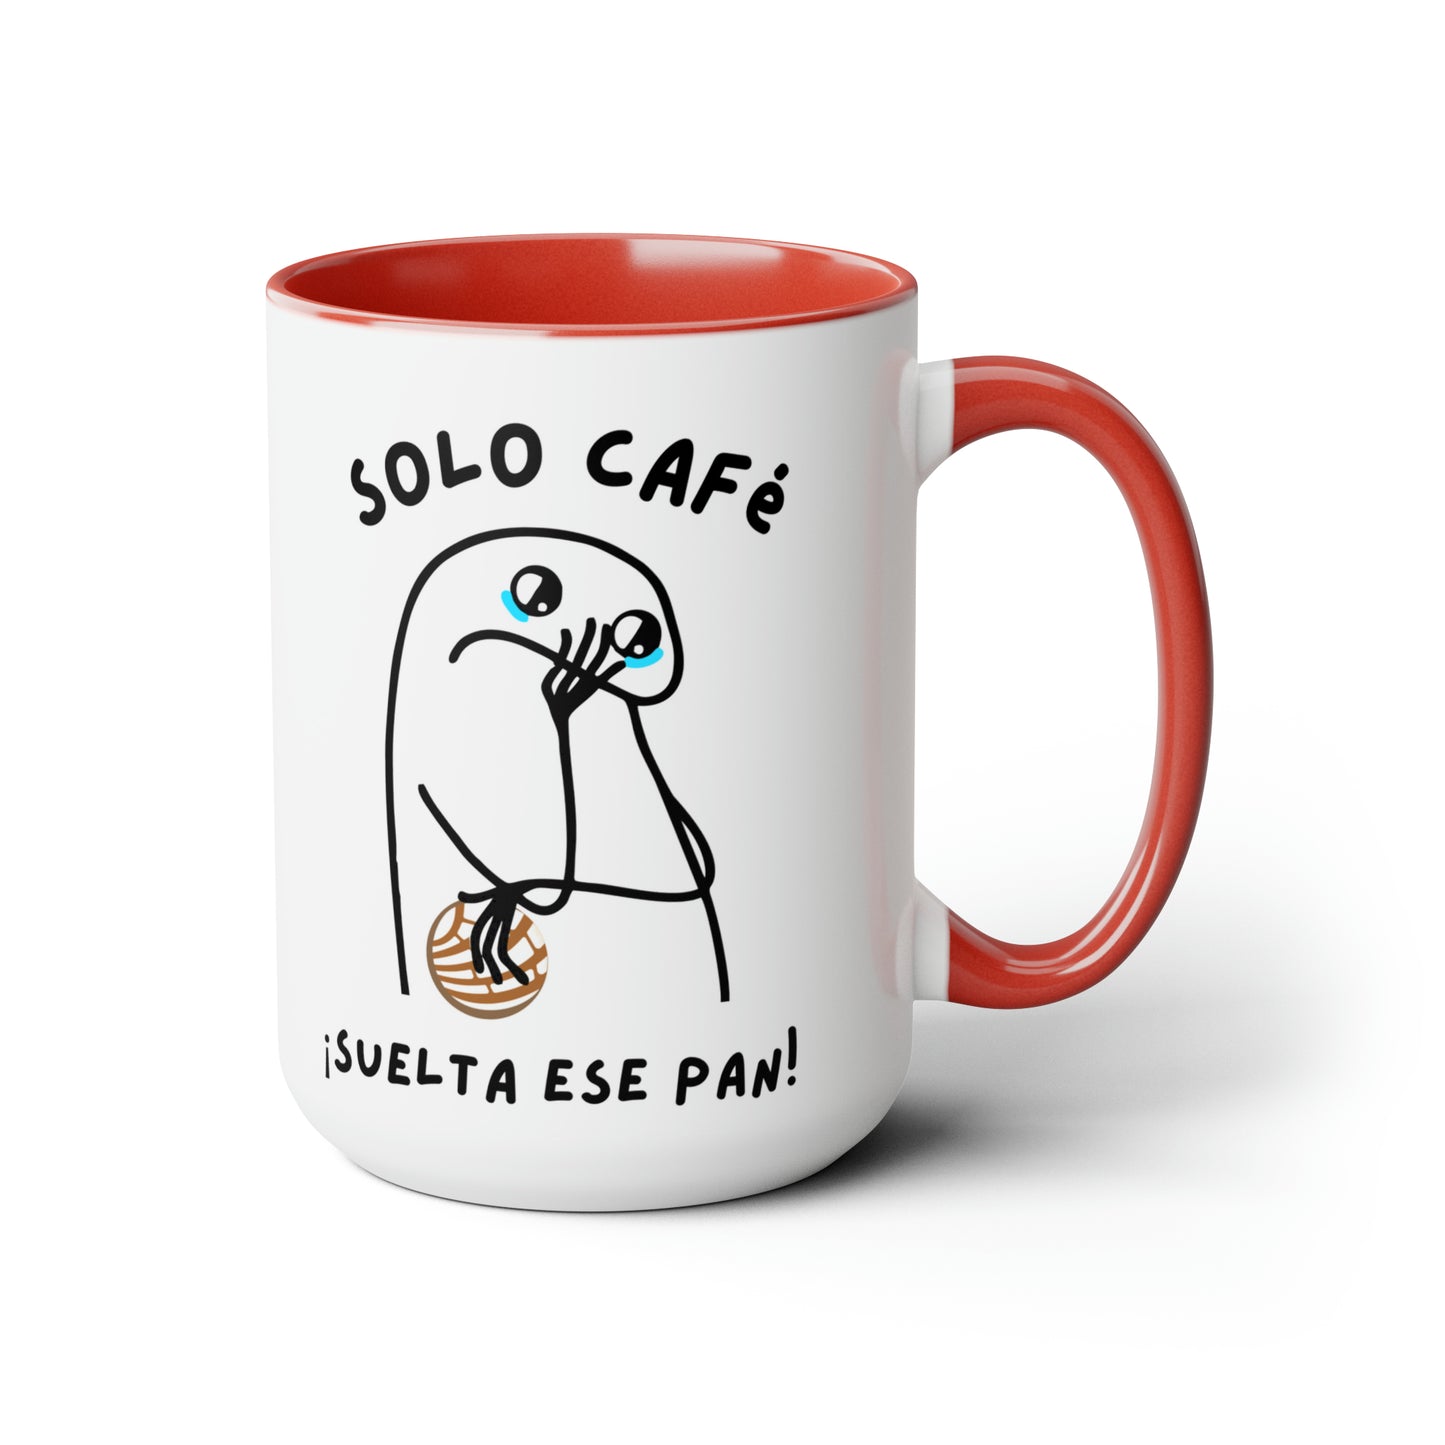 Solo cafe suelta ese pan Coffee Mugs, 15oz of Latin friend or Mexican dad. Gift for Mexican girlfriend or Hispanic mom. Mexican mug